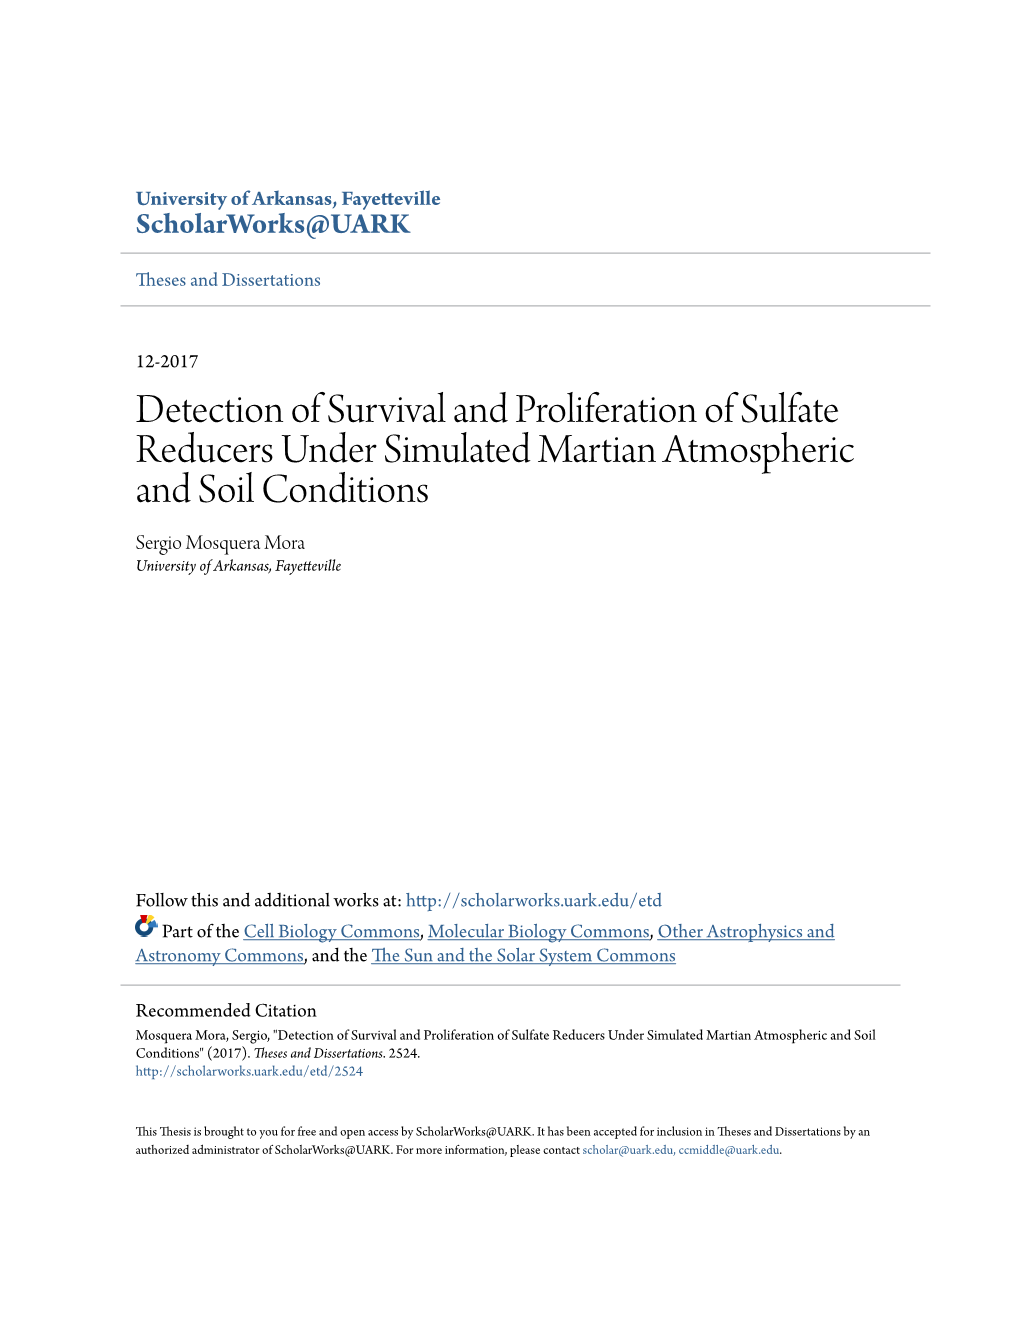 Detection of Survival and Proliferation of Sulfate Reducers Under